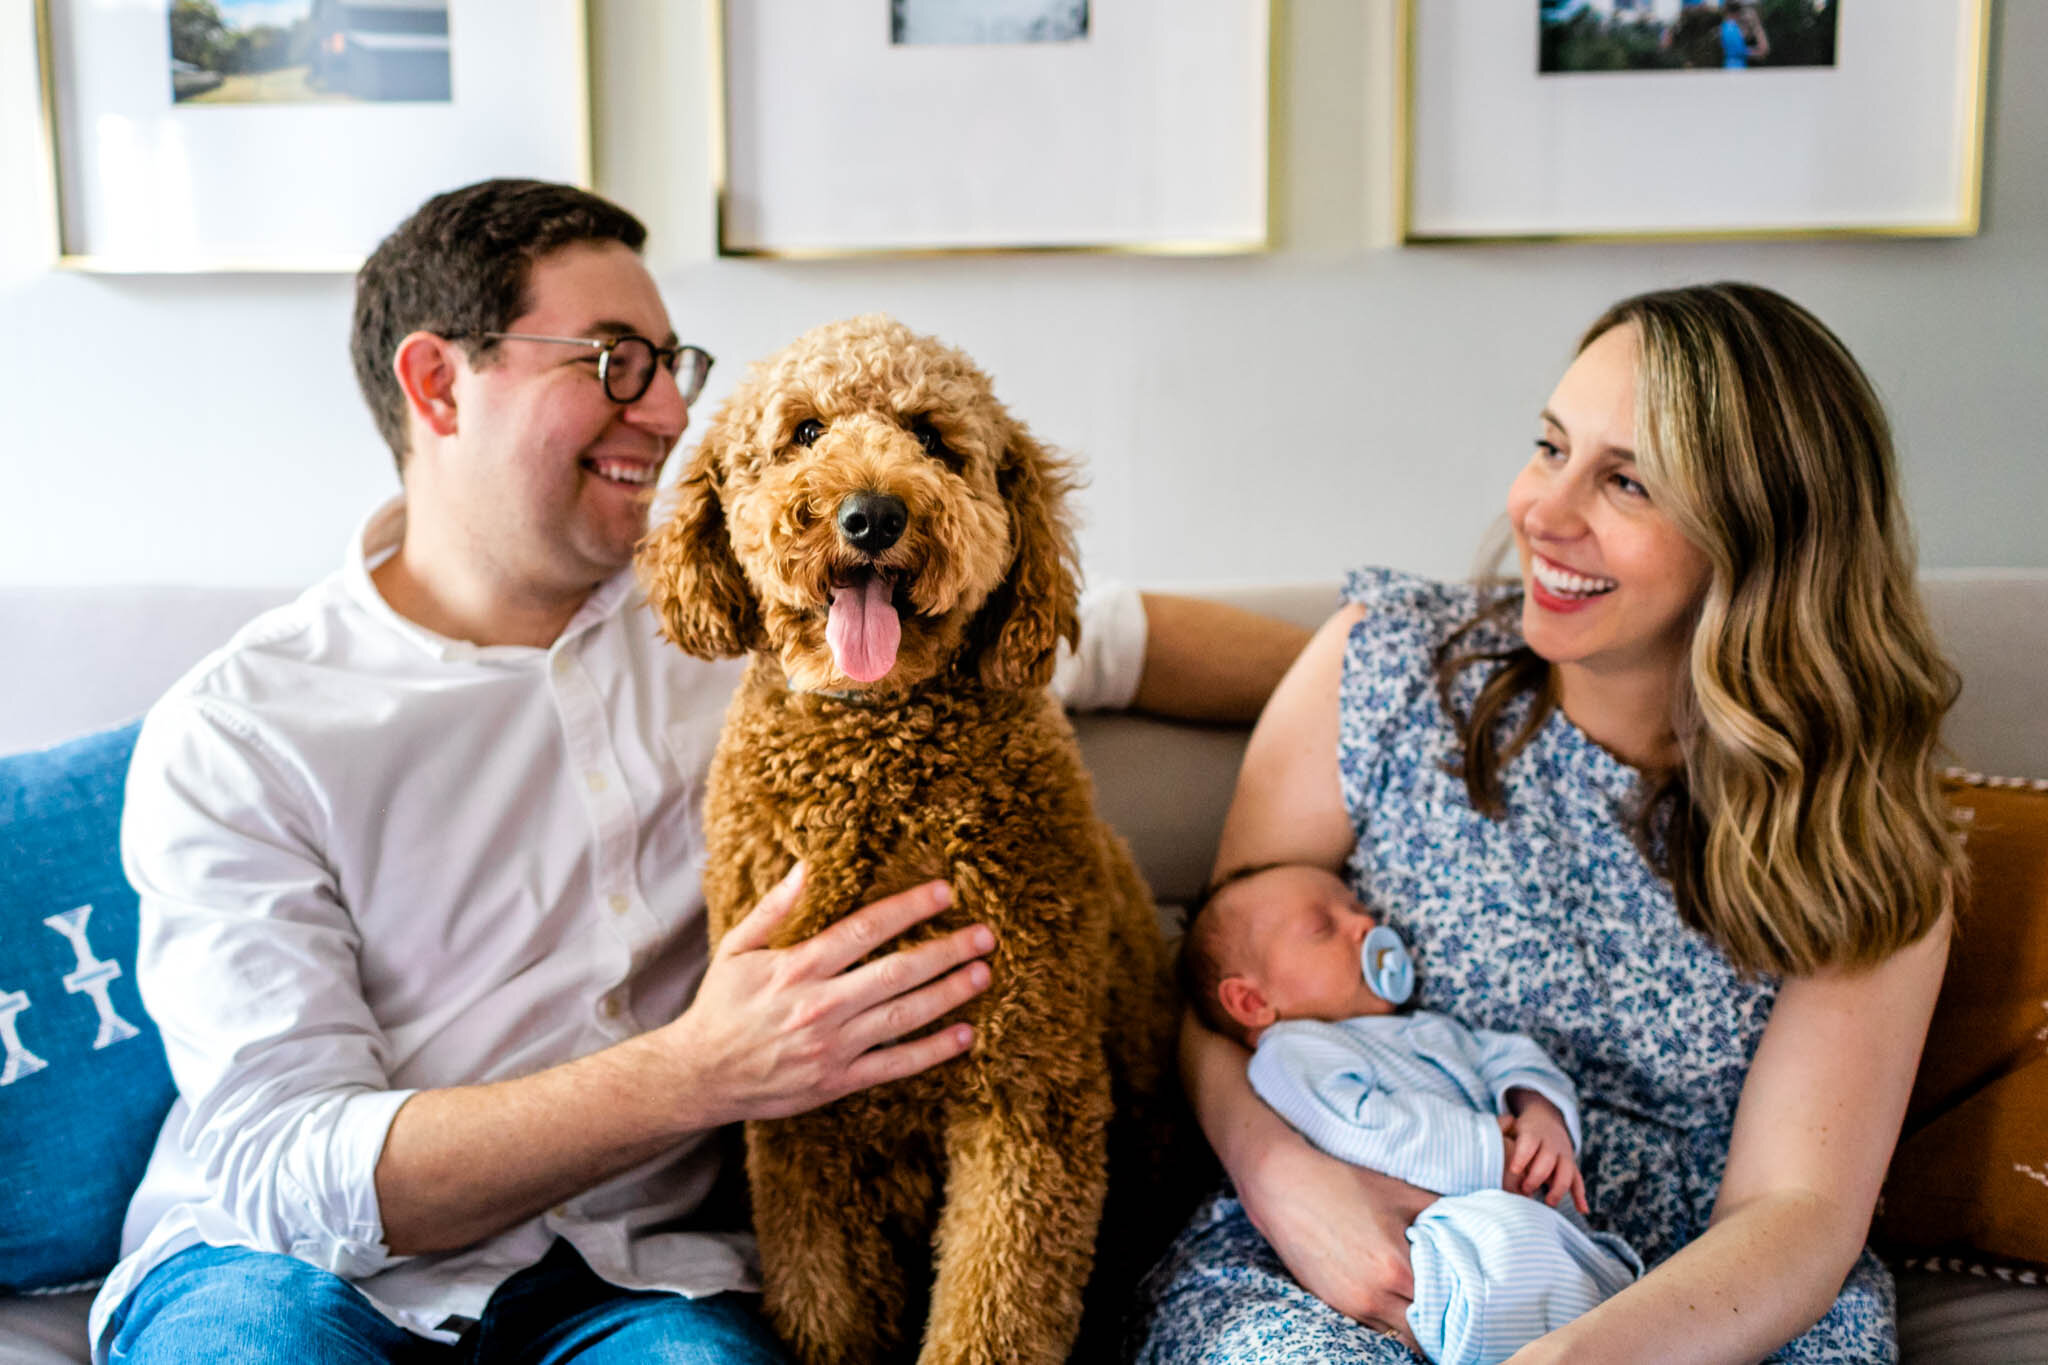 Candid photo of dog sitting in the middle of man and woman | Greensboro Newborn Photographer | By G. Lin Photography